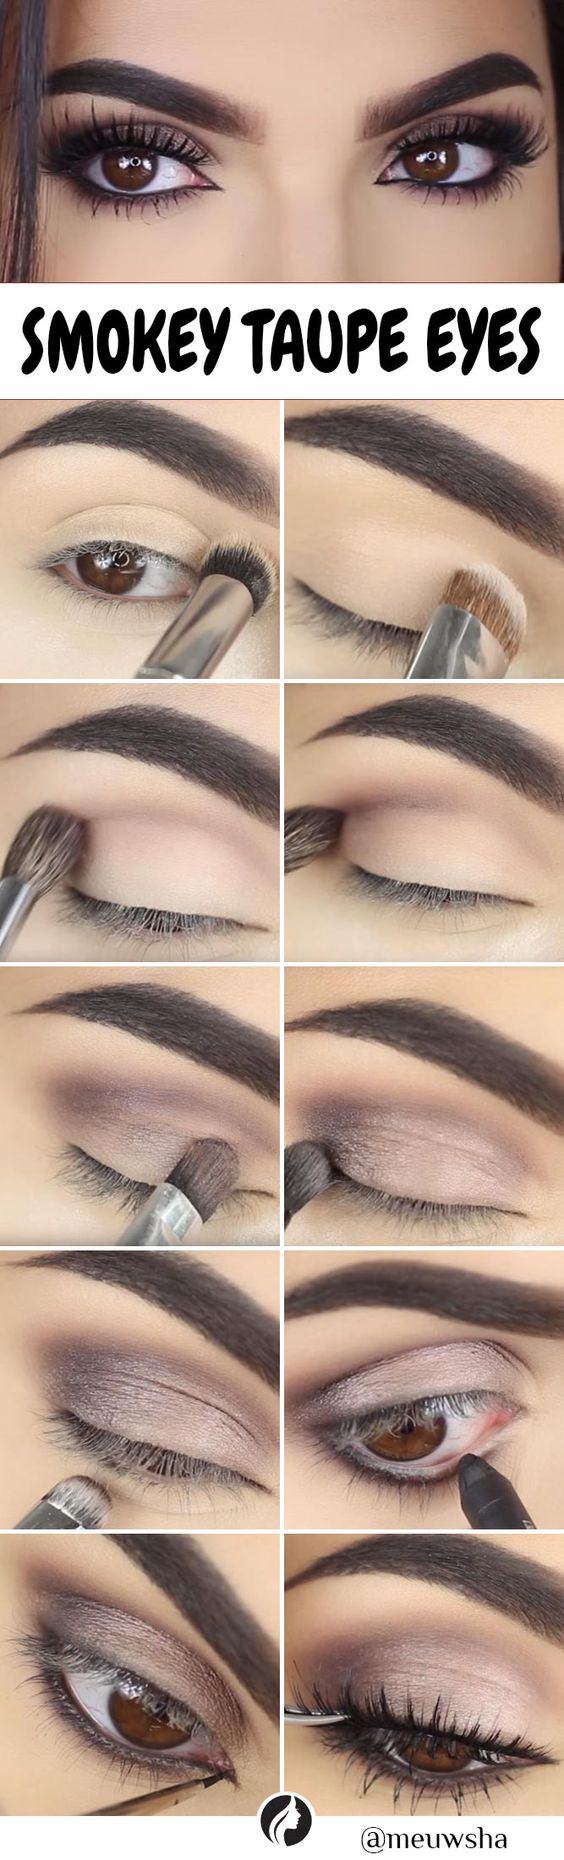 This step by step Smokey Taupe Eye Makeup DIY is perfect and can be followed easily. Check out!